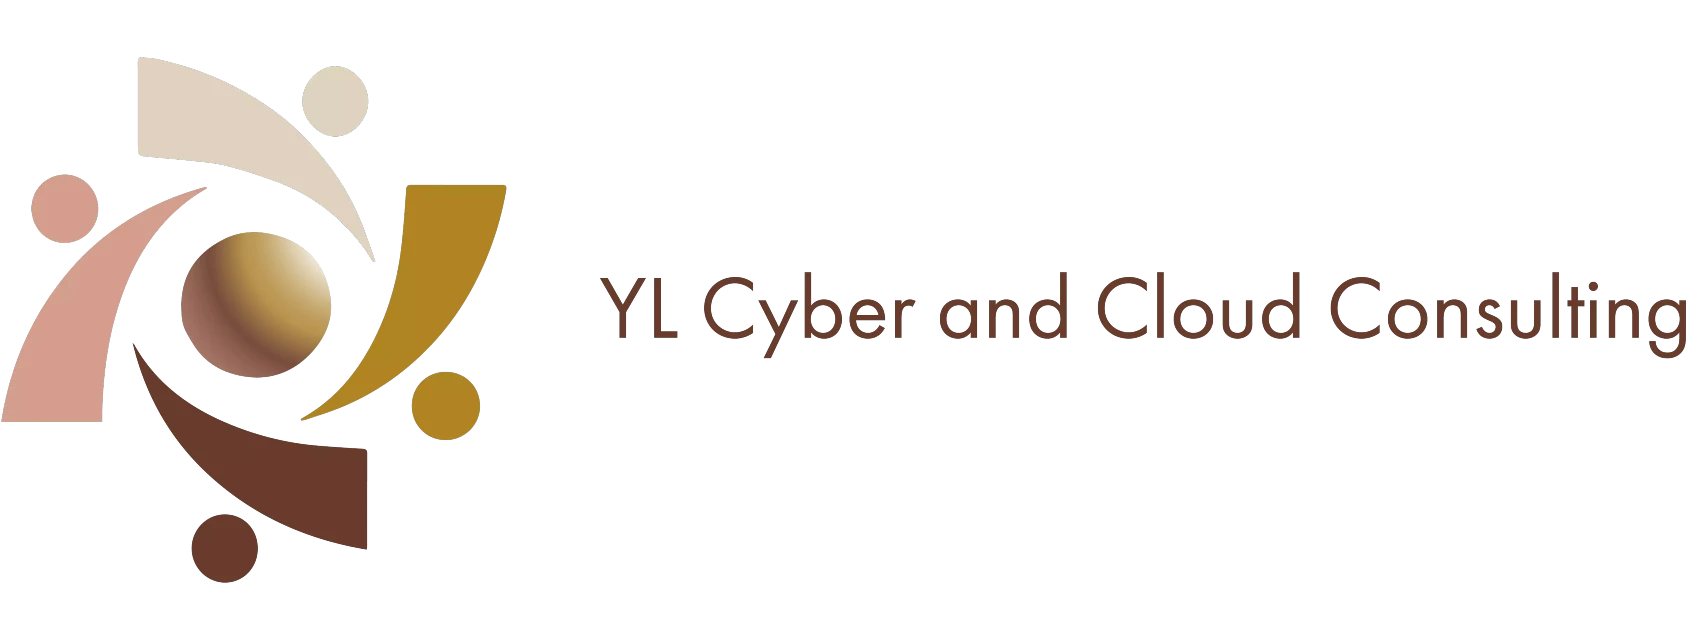 YL Cyber & Cloud Consulting